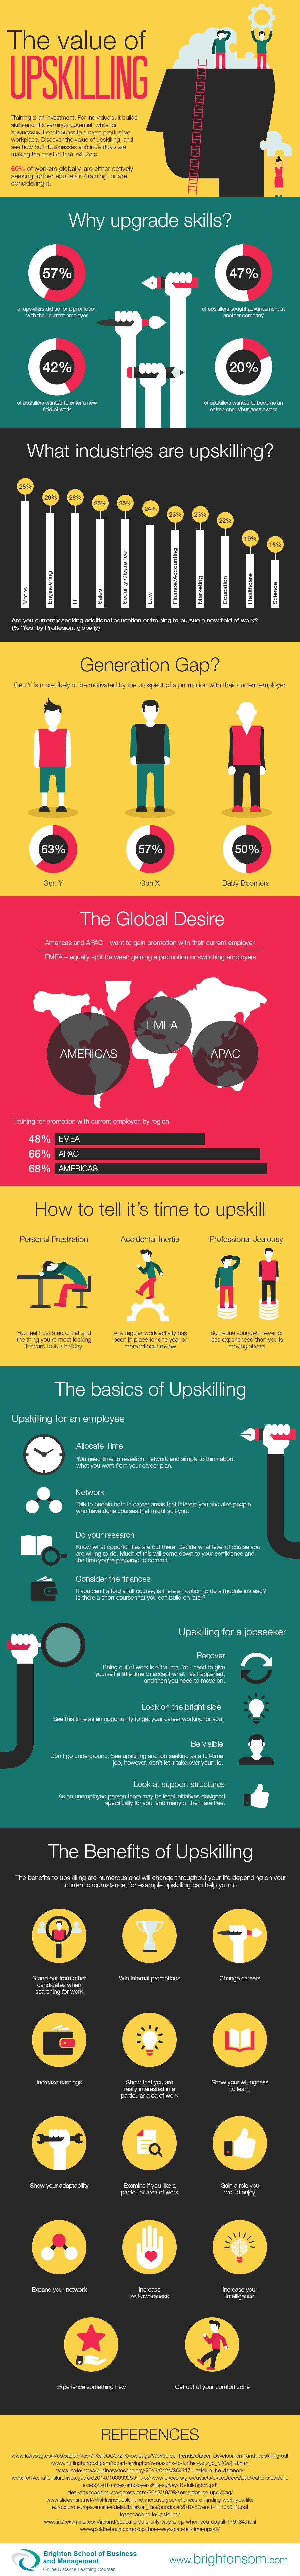 The-Value-of-Upskilling-infographic